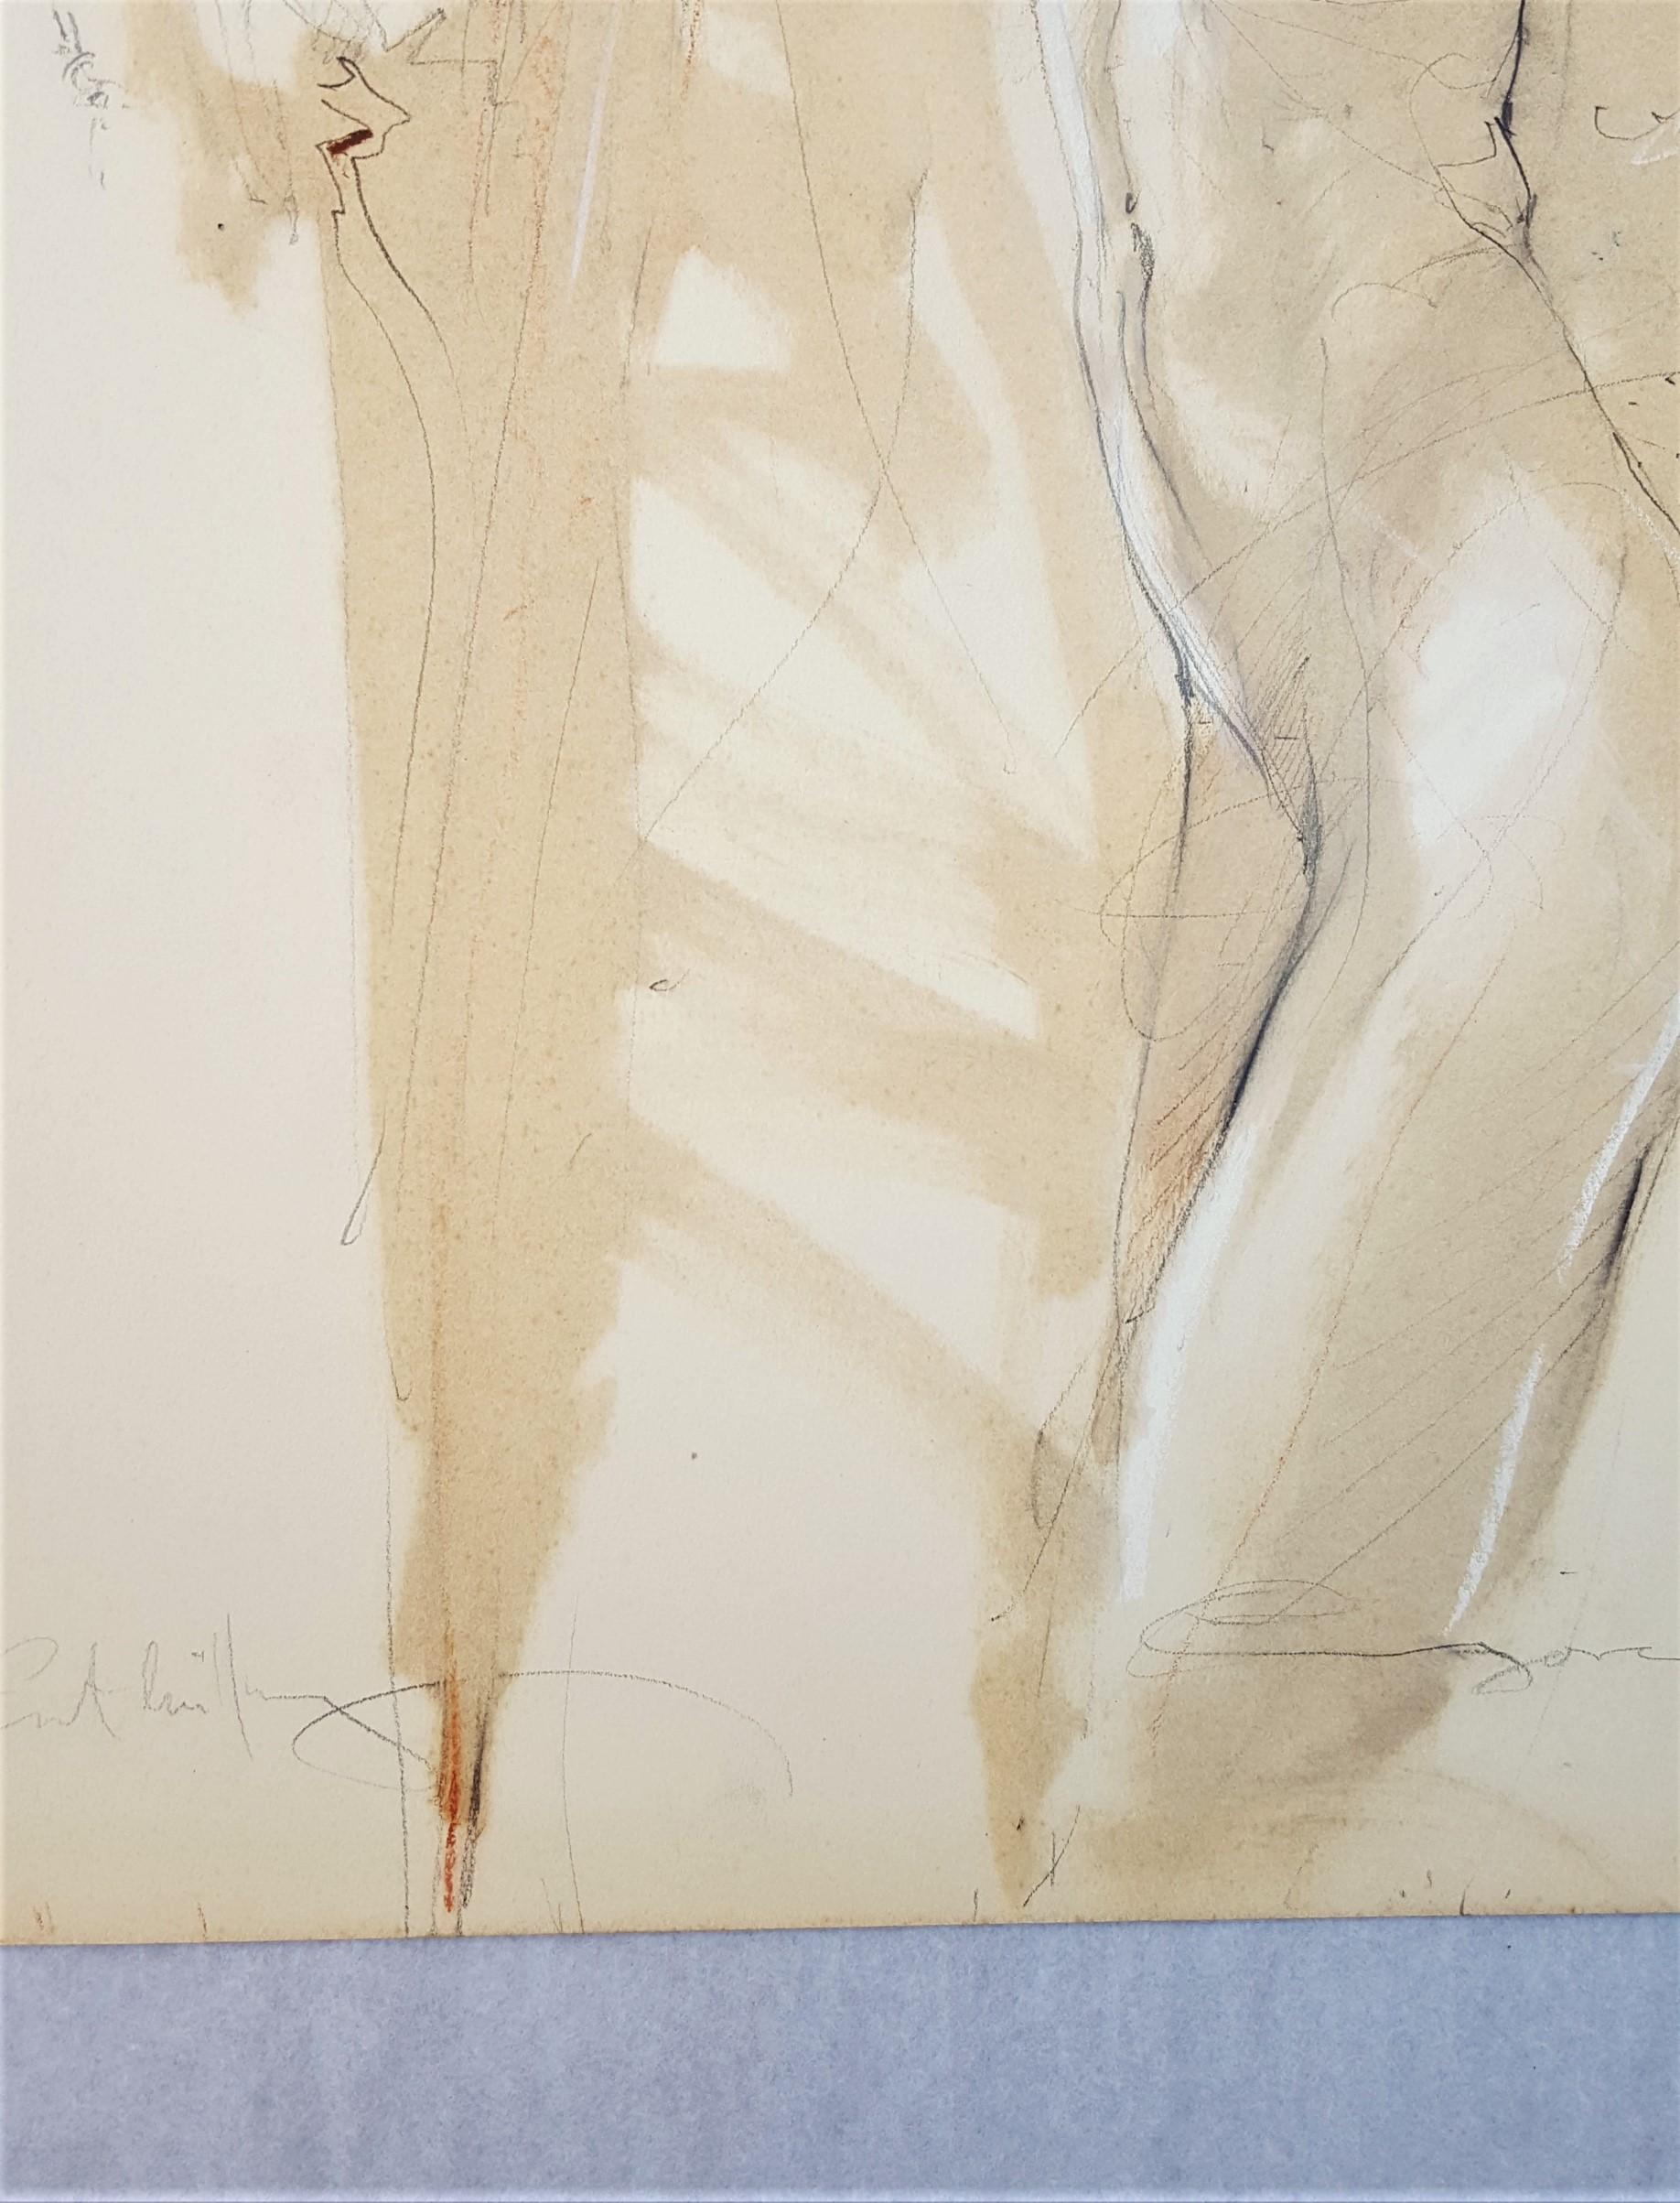 An original signed pencil, colored pencil, pastel, and watercolor on cream Schoellers Parole paper by German artist Jurgen Gorg (1951-) illegibly titled lower left, 1985. Hand pencil signed and dated by Gorg lower right, and titled lower left.